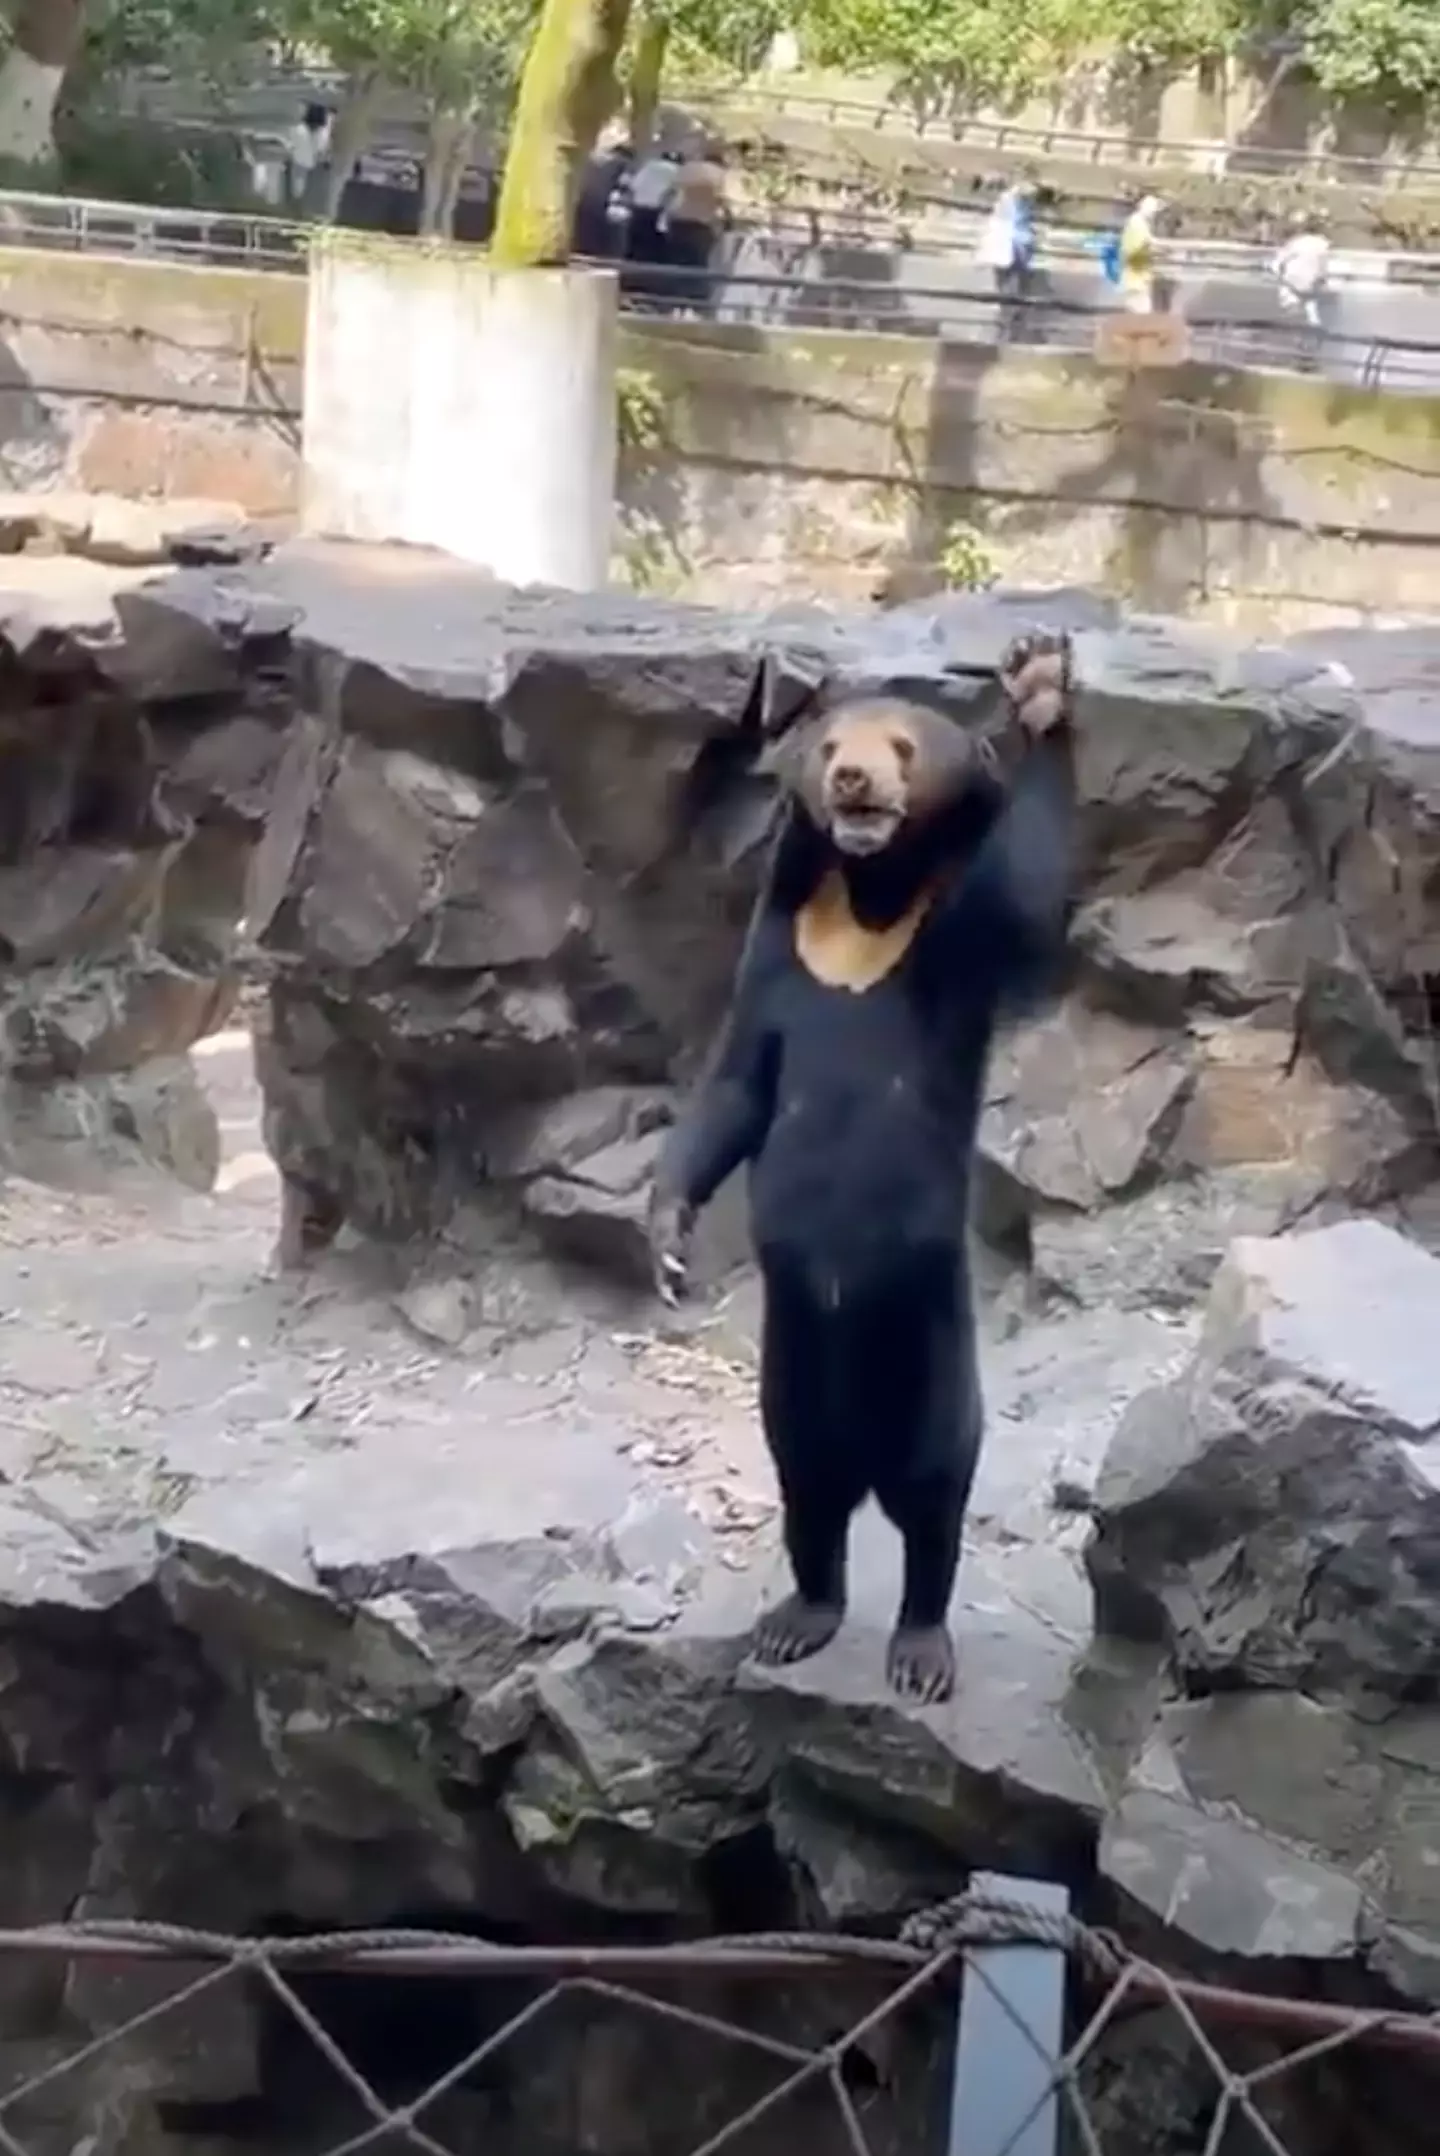 A new video shows the bear waving.